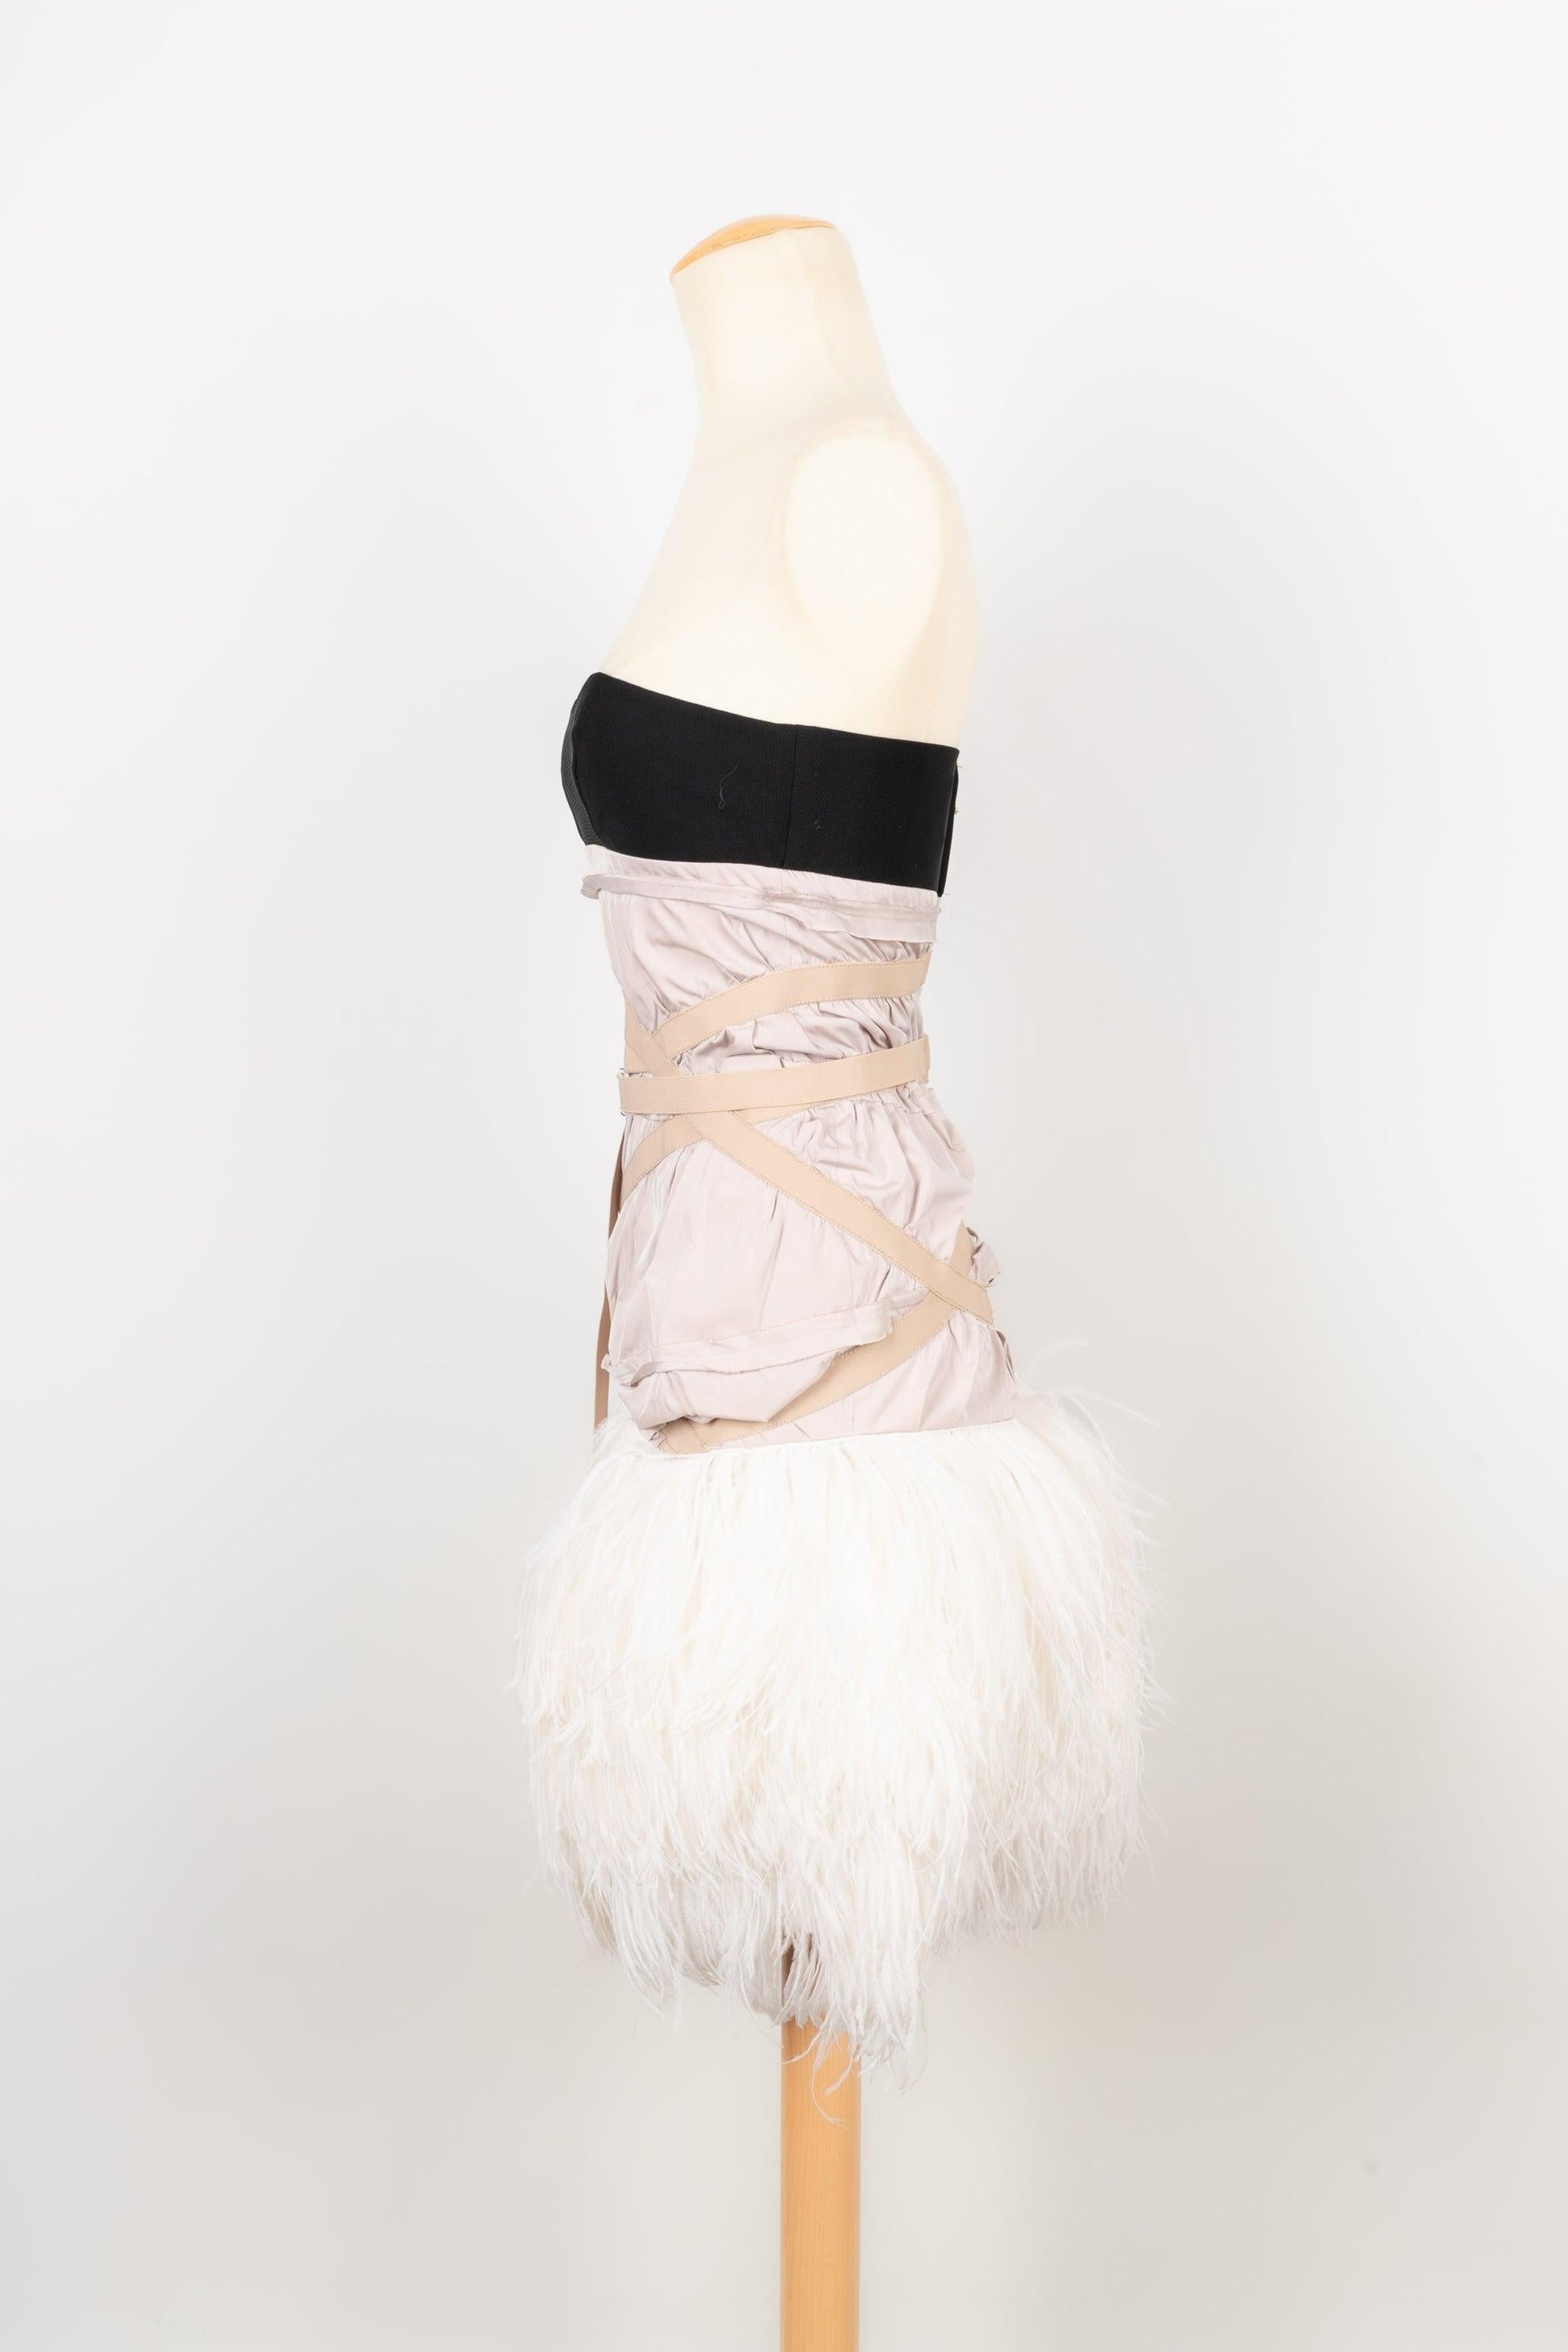 Paule Ka - Taffeta and feather bustier dress. No size label, it fits a 36FR. Piece worn by the singer Rihanna.

Additional information:
Condition: Very good condition
Dimensions: Chest: 38 cm - Waist: 32 cm - Length: 70 cm

Seller Reference: VR219